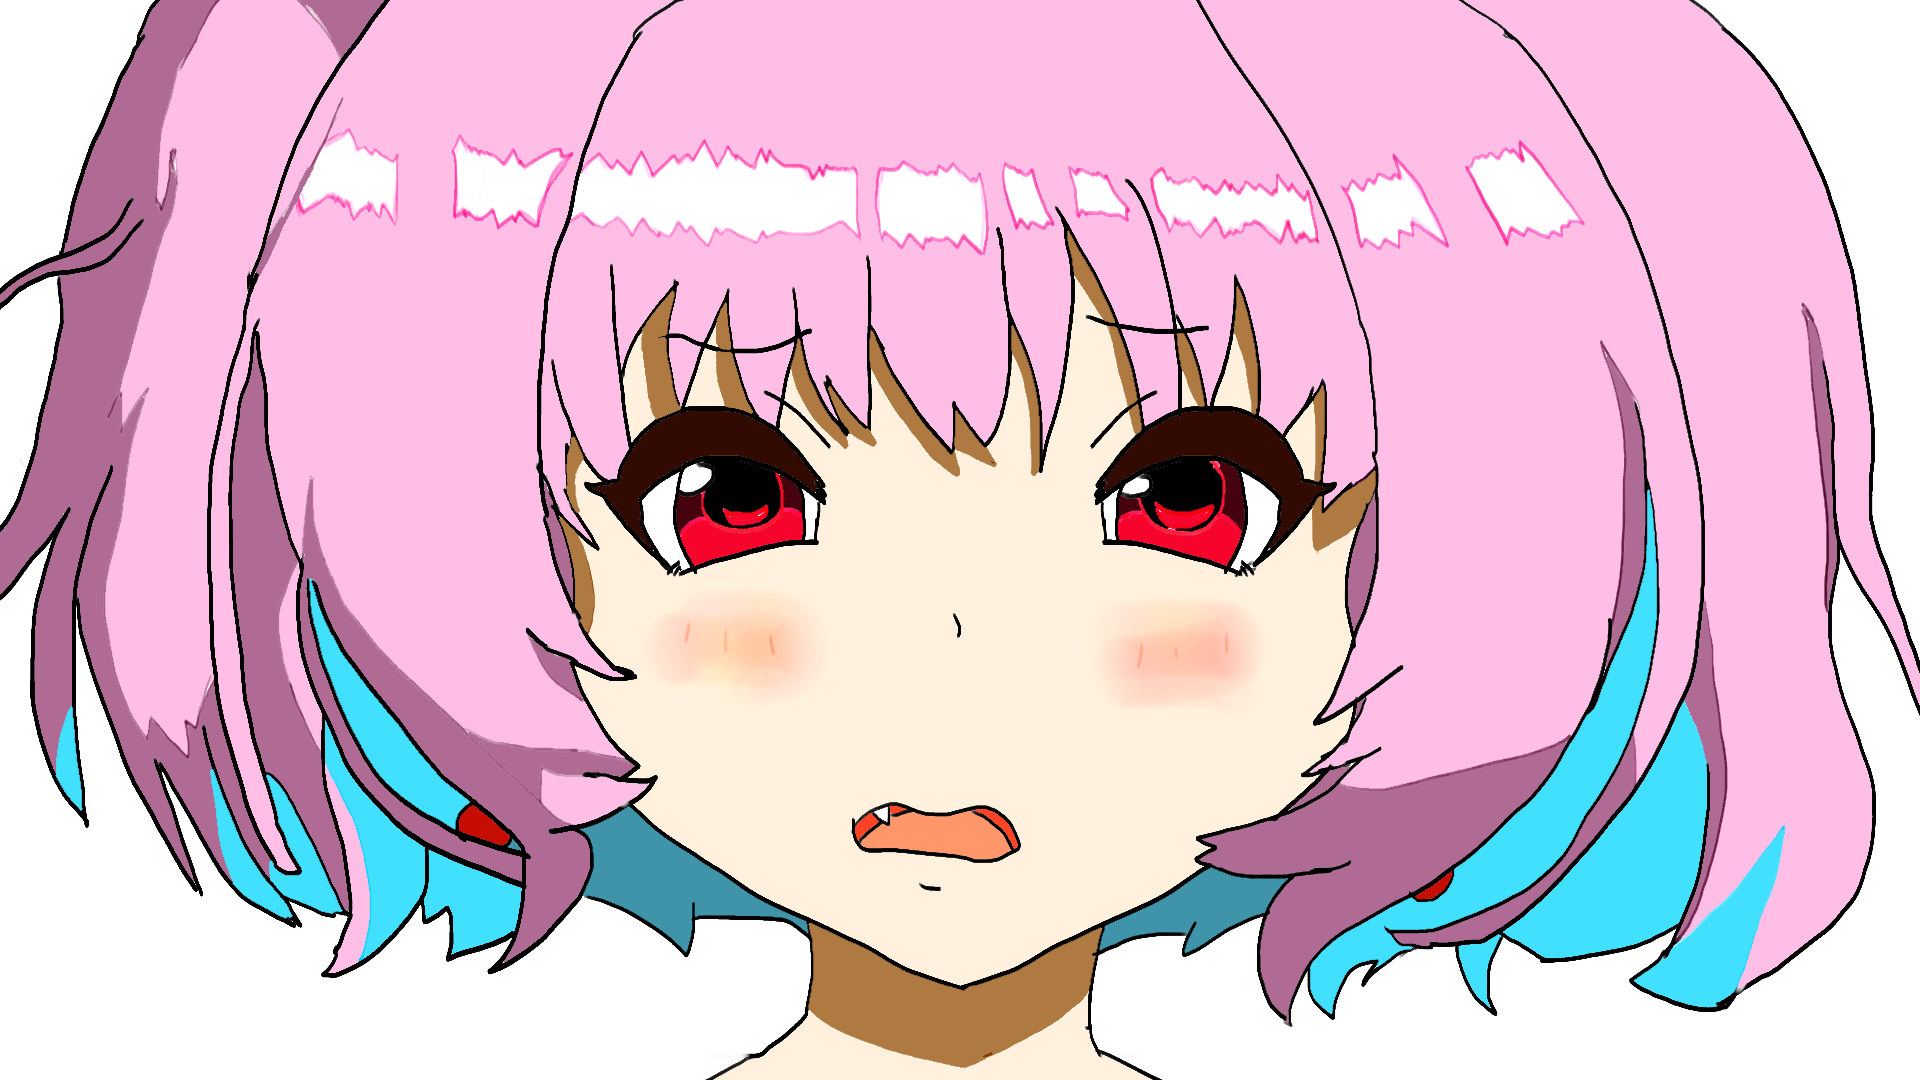 Yumemi fanart, I guess (They were supposed to be twintails. Ended up looking like a fluffball.)